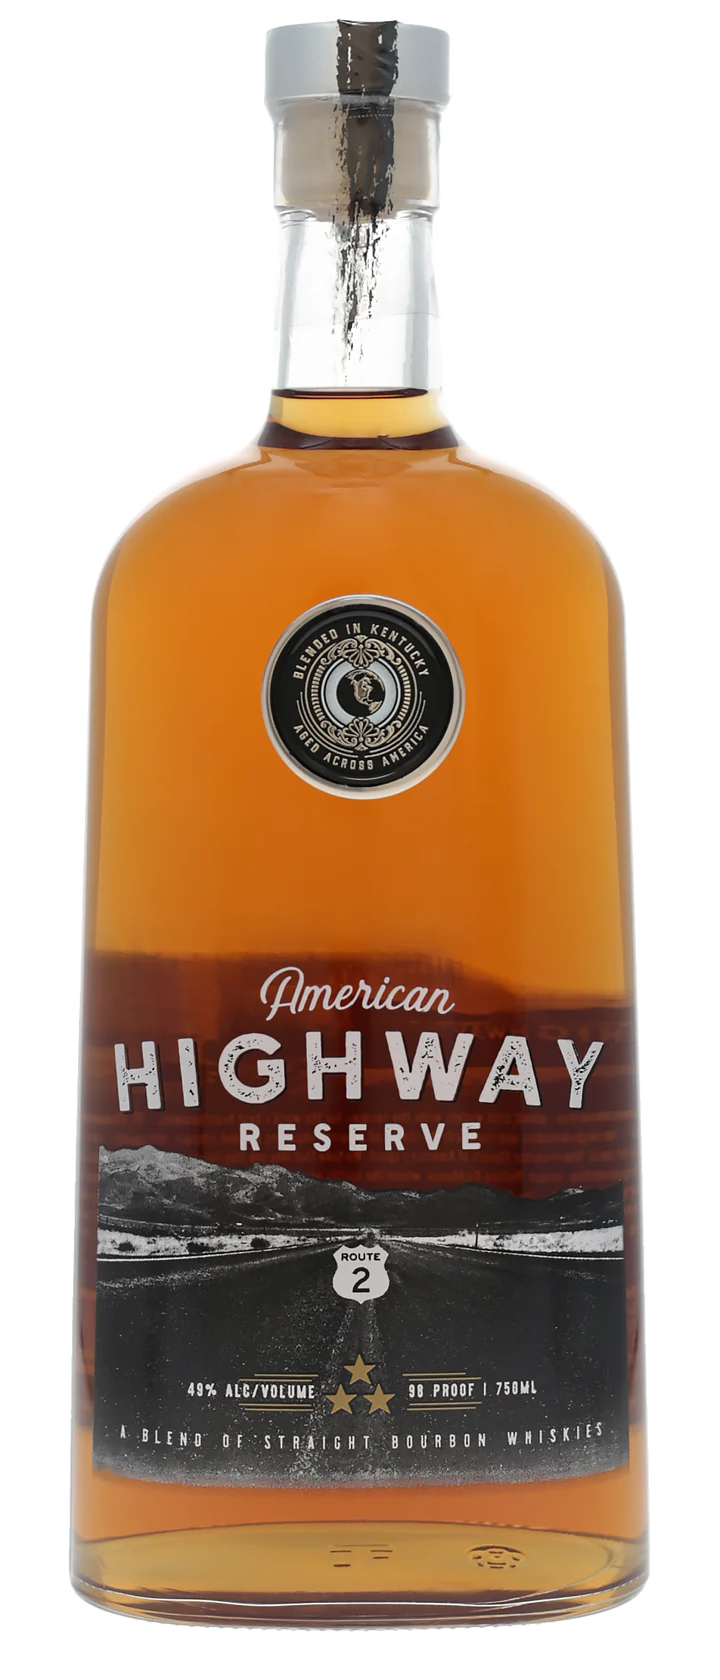 American Highway Reserve Route 2